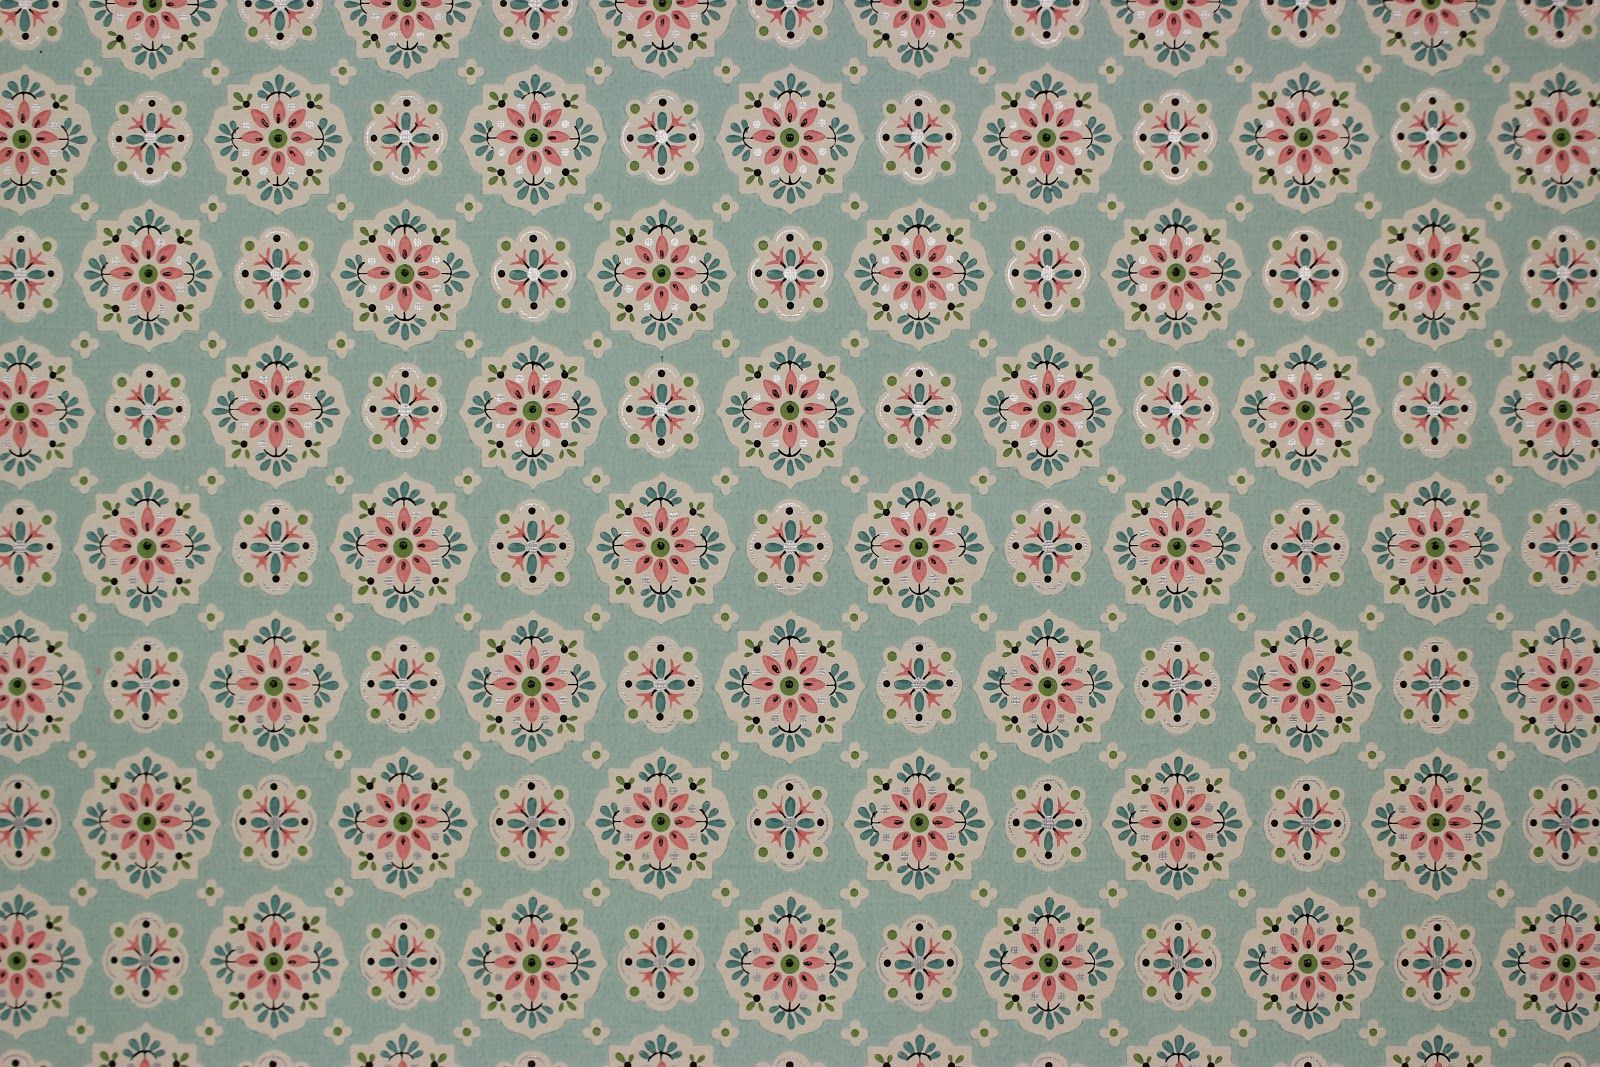 Finding Old Wallpaper Patterns